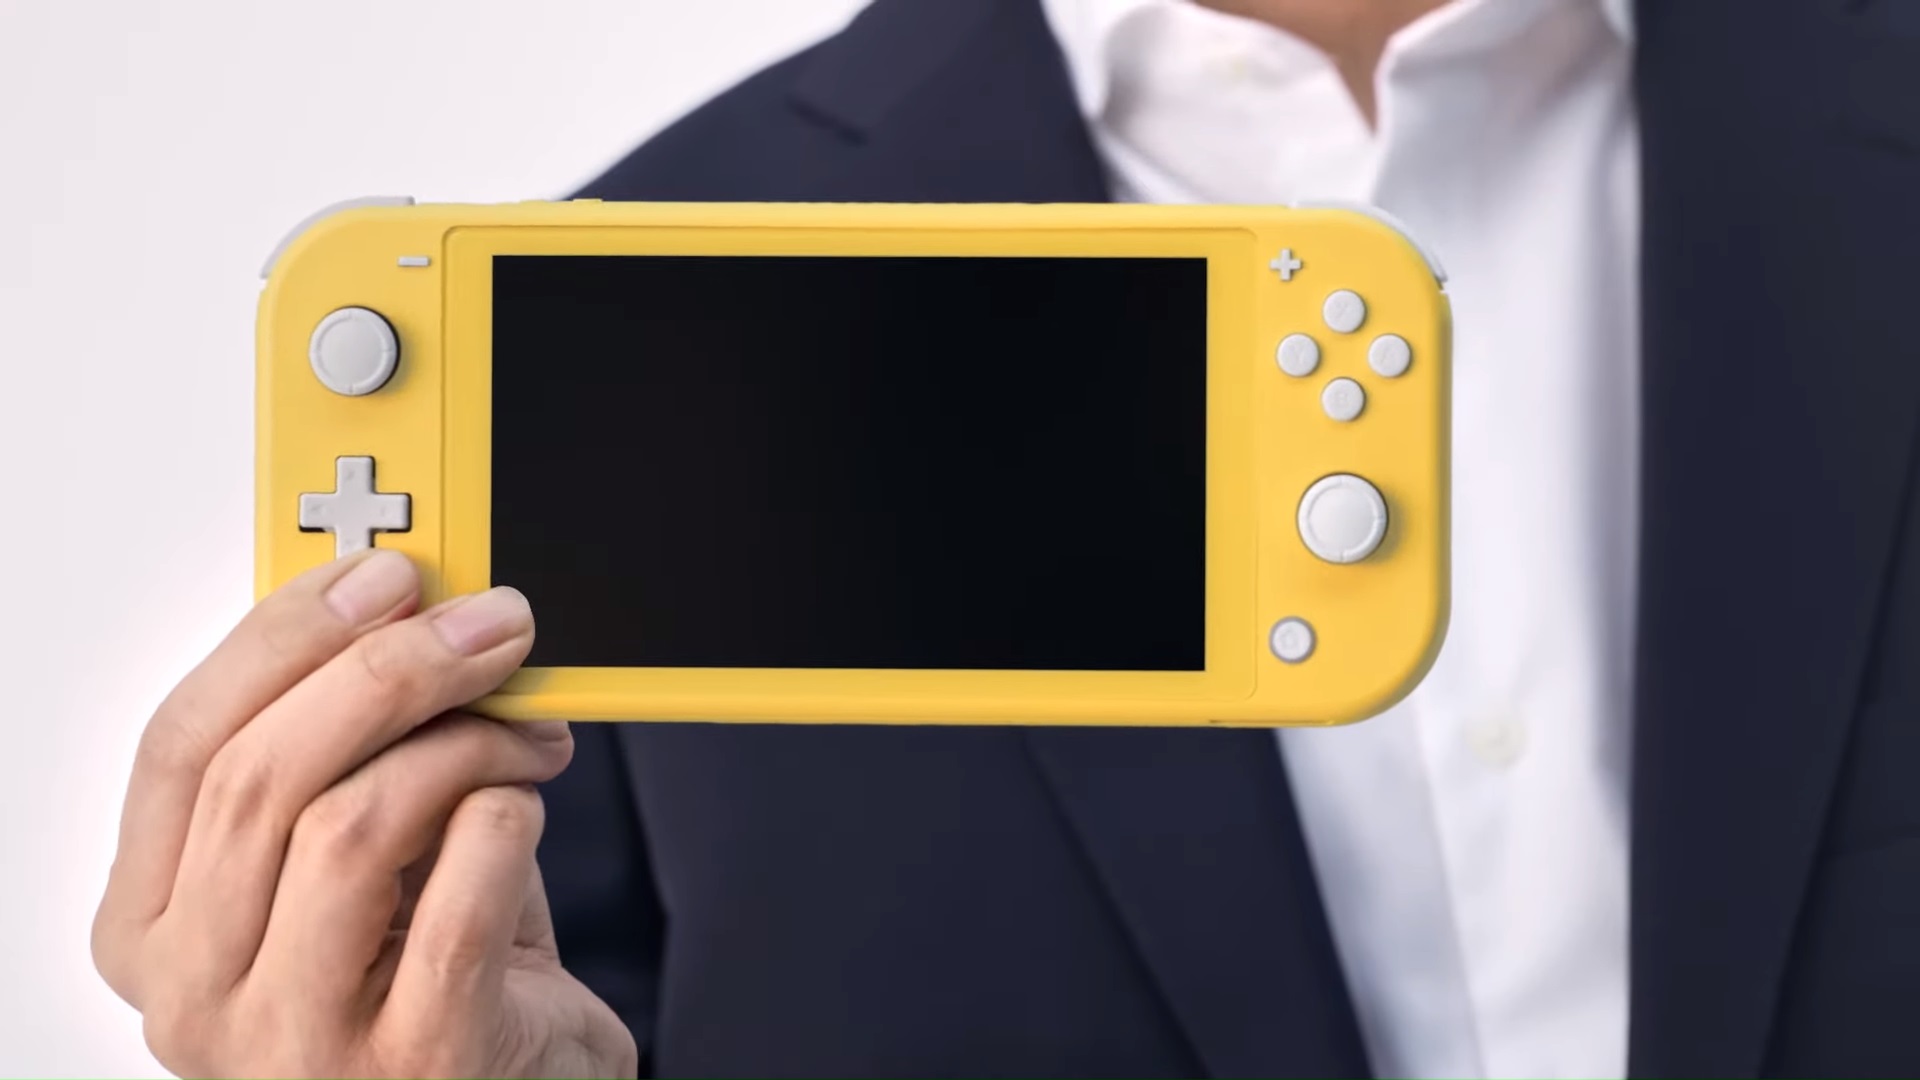 when is the new switch coming out 2020